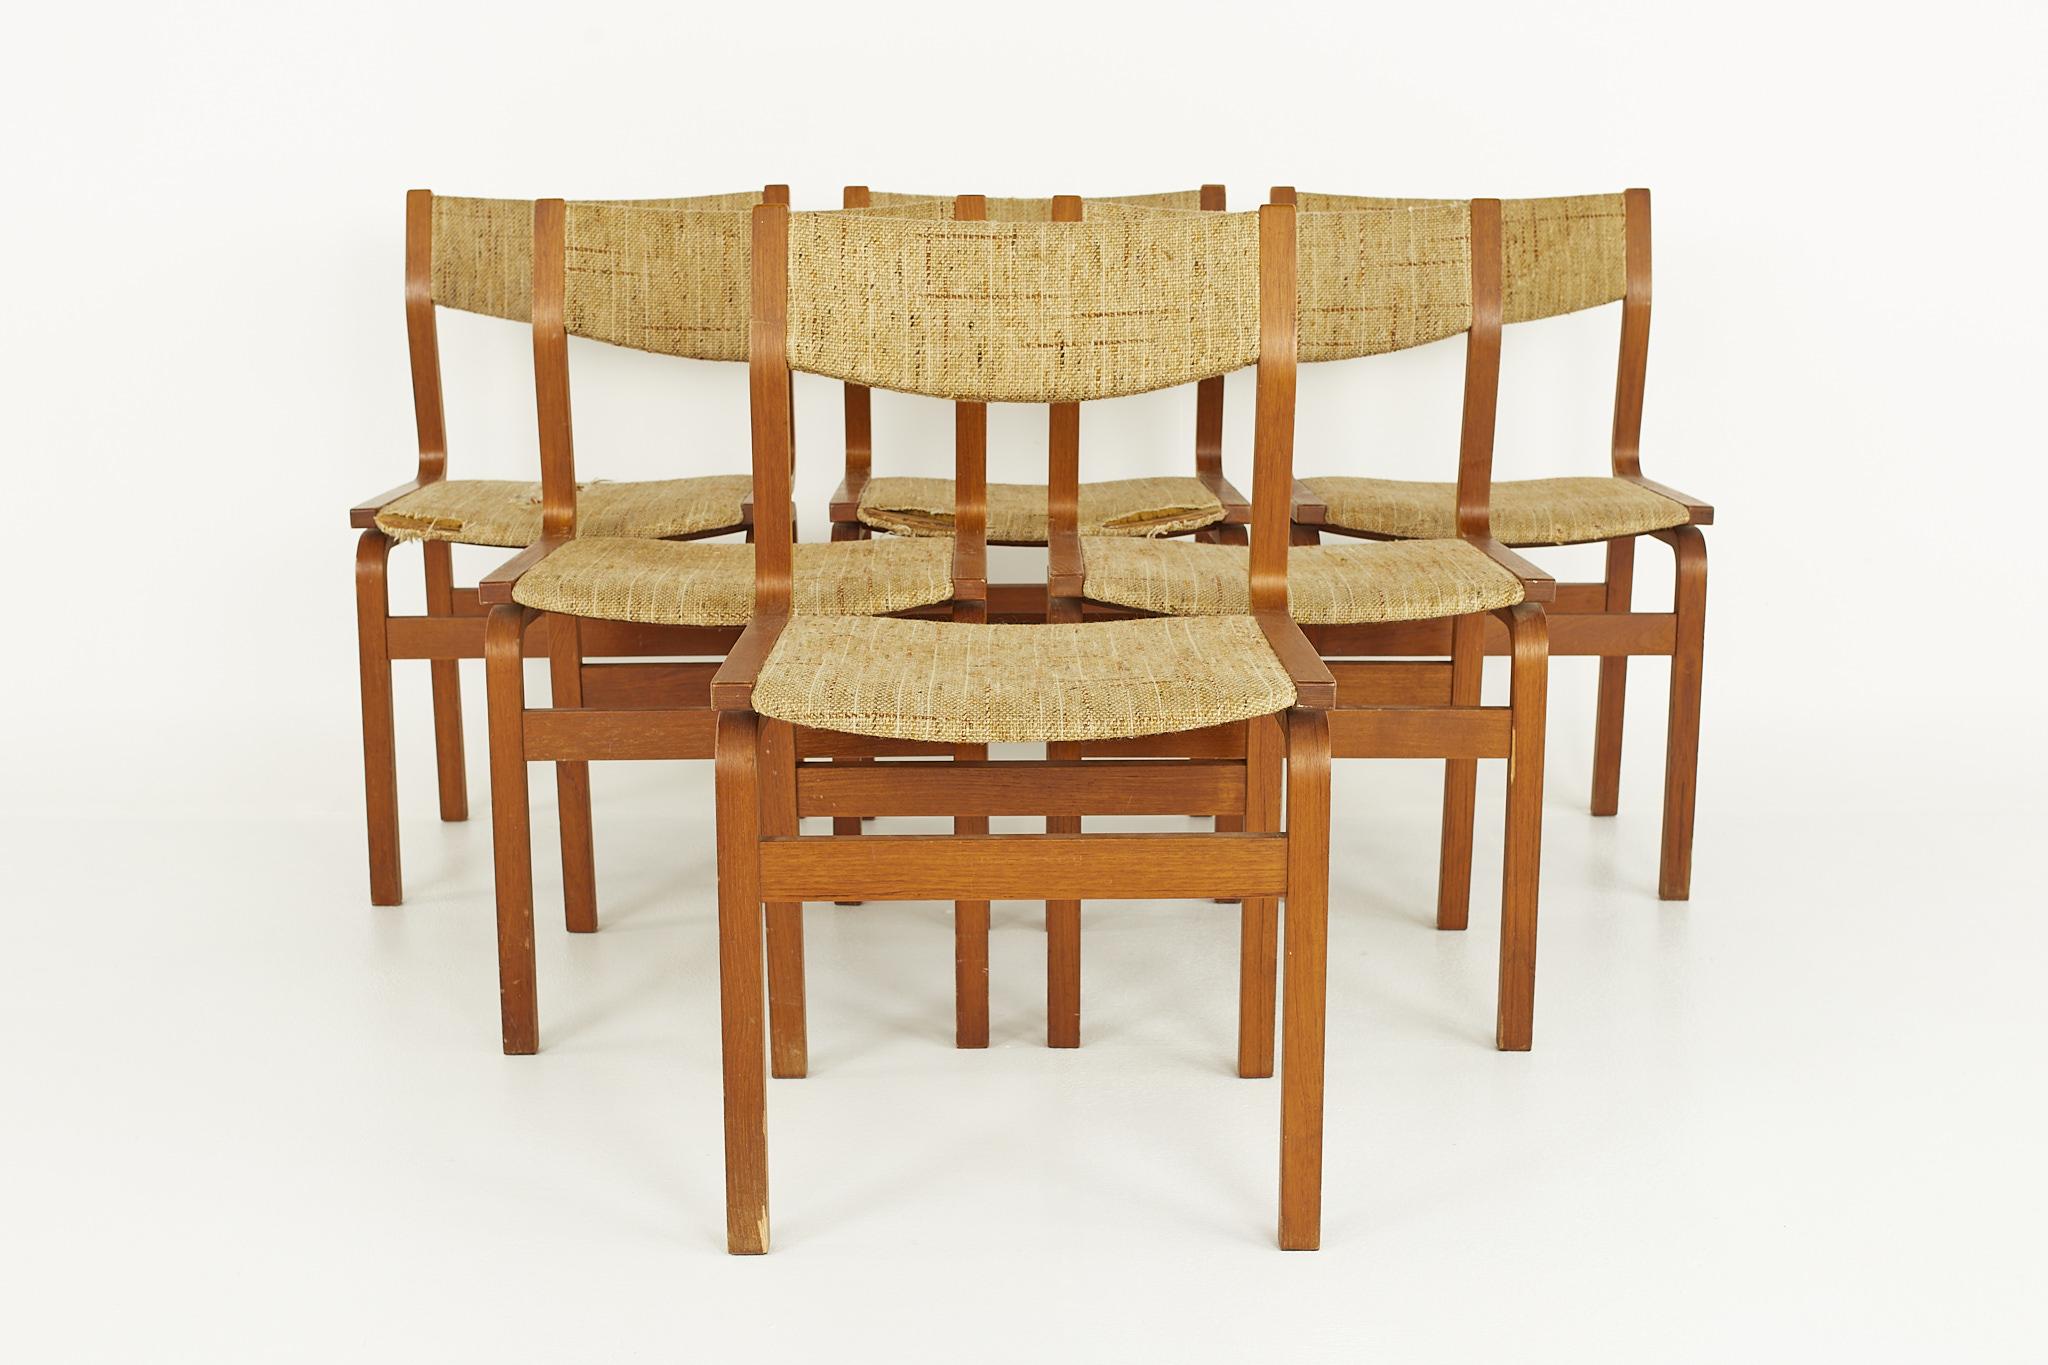 Bruno Mathsson Thonet Style mid century bentwood dining chairs - Set of 6

Each chair measures: 19 wide x 17 deep x 32.5 high, with a seat height of 19 inches and chair clearance of 19 inches

All pieces of furniture can be had in what we call